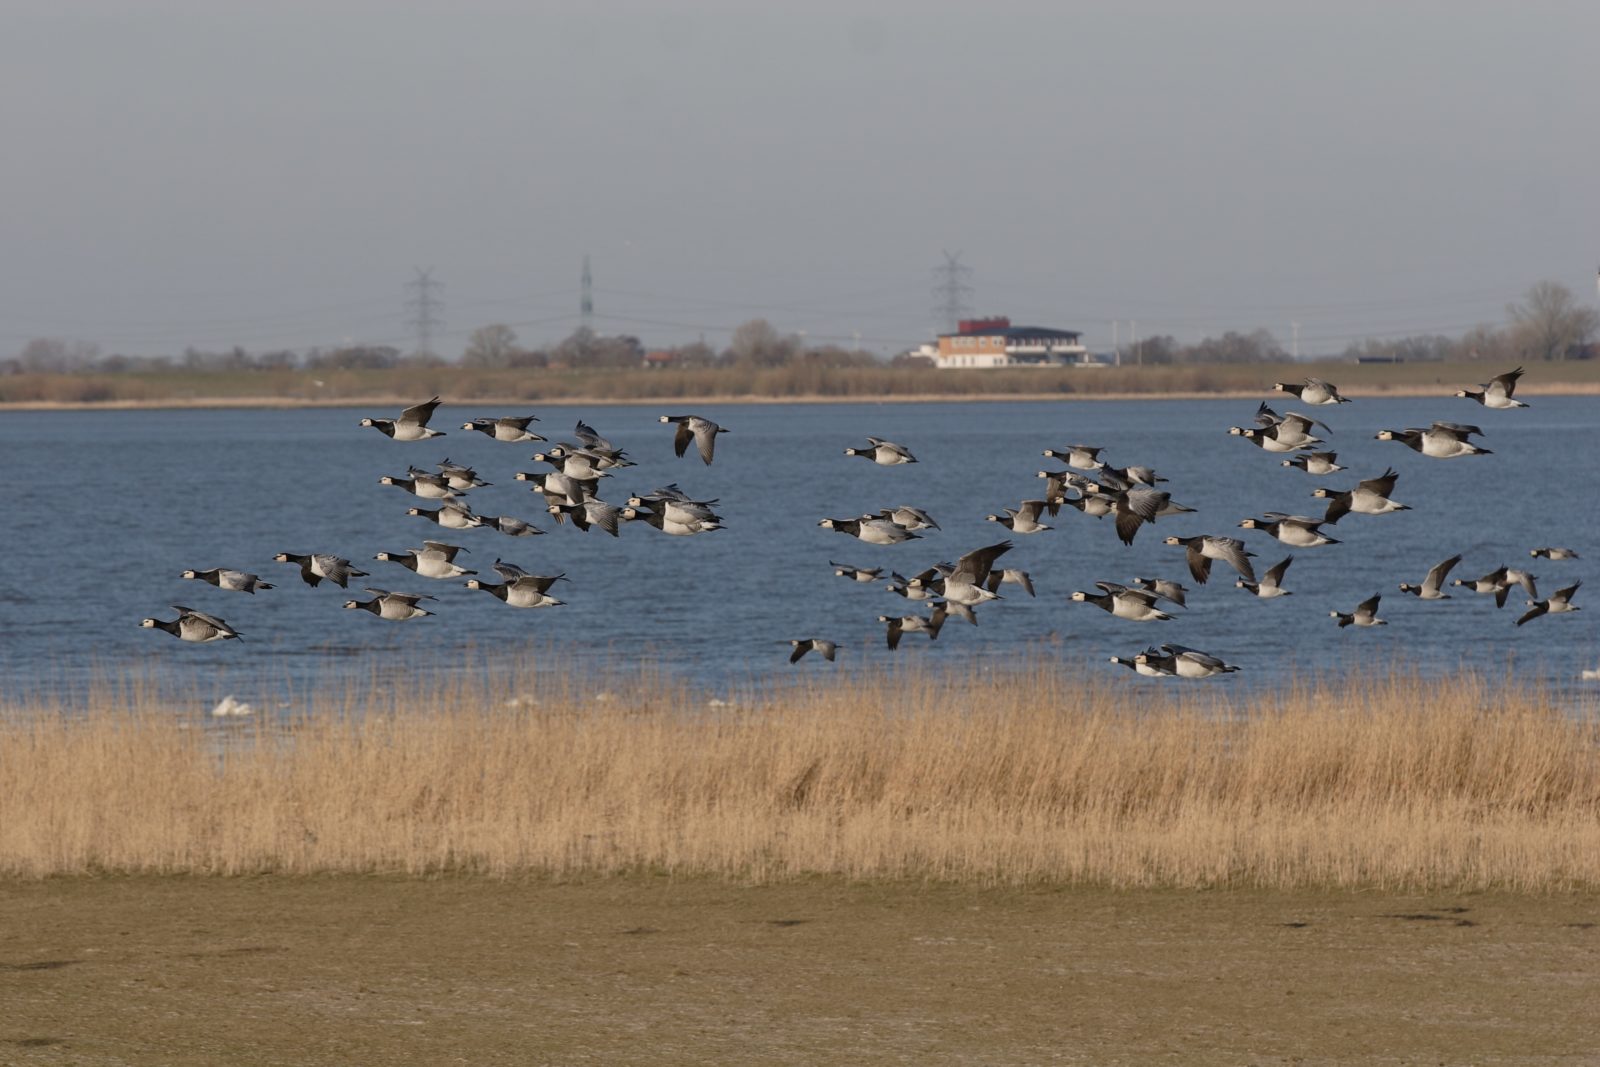 Coastal image from Tideelbe Germany showing geese flying low over a tidal area